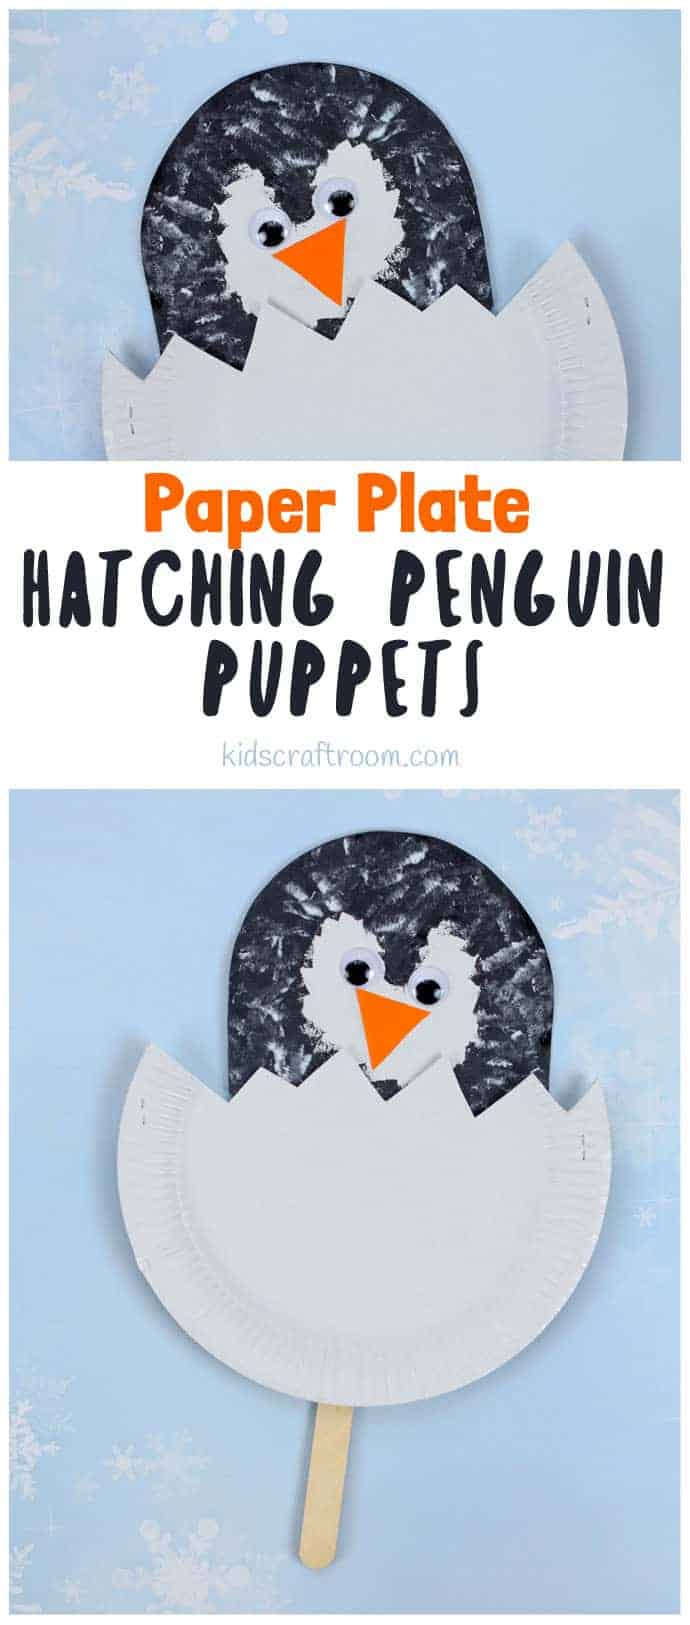 Hatching Paper Plate Penguin Chick Puppets are easy and so cute! This paper plate penguin craft is a fun and interactive Winter craft for toddlers and preschoolers. #penguins #penguin #penguincrafts #paperplates #paperplatecrafts #kidscraftroom #kidscrafts #kidscraft #winter #wintercrafts #puppets #puppetcrafts 